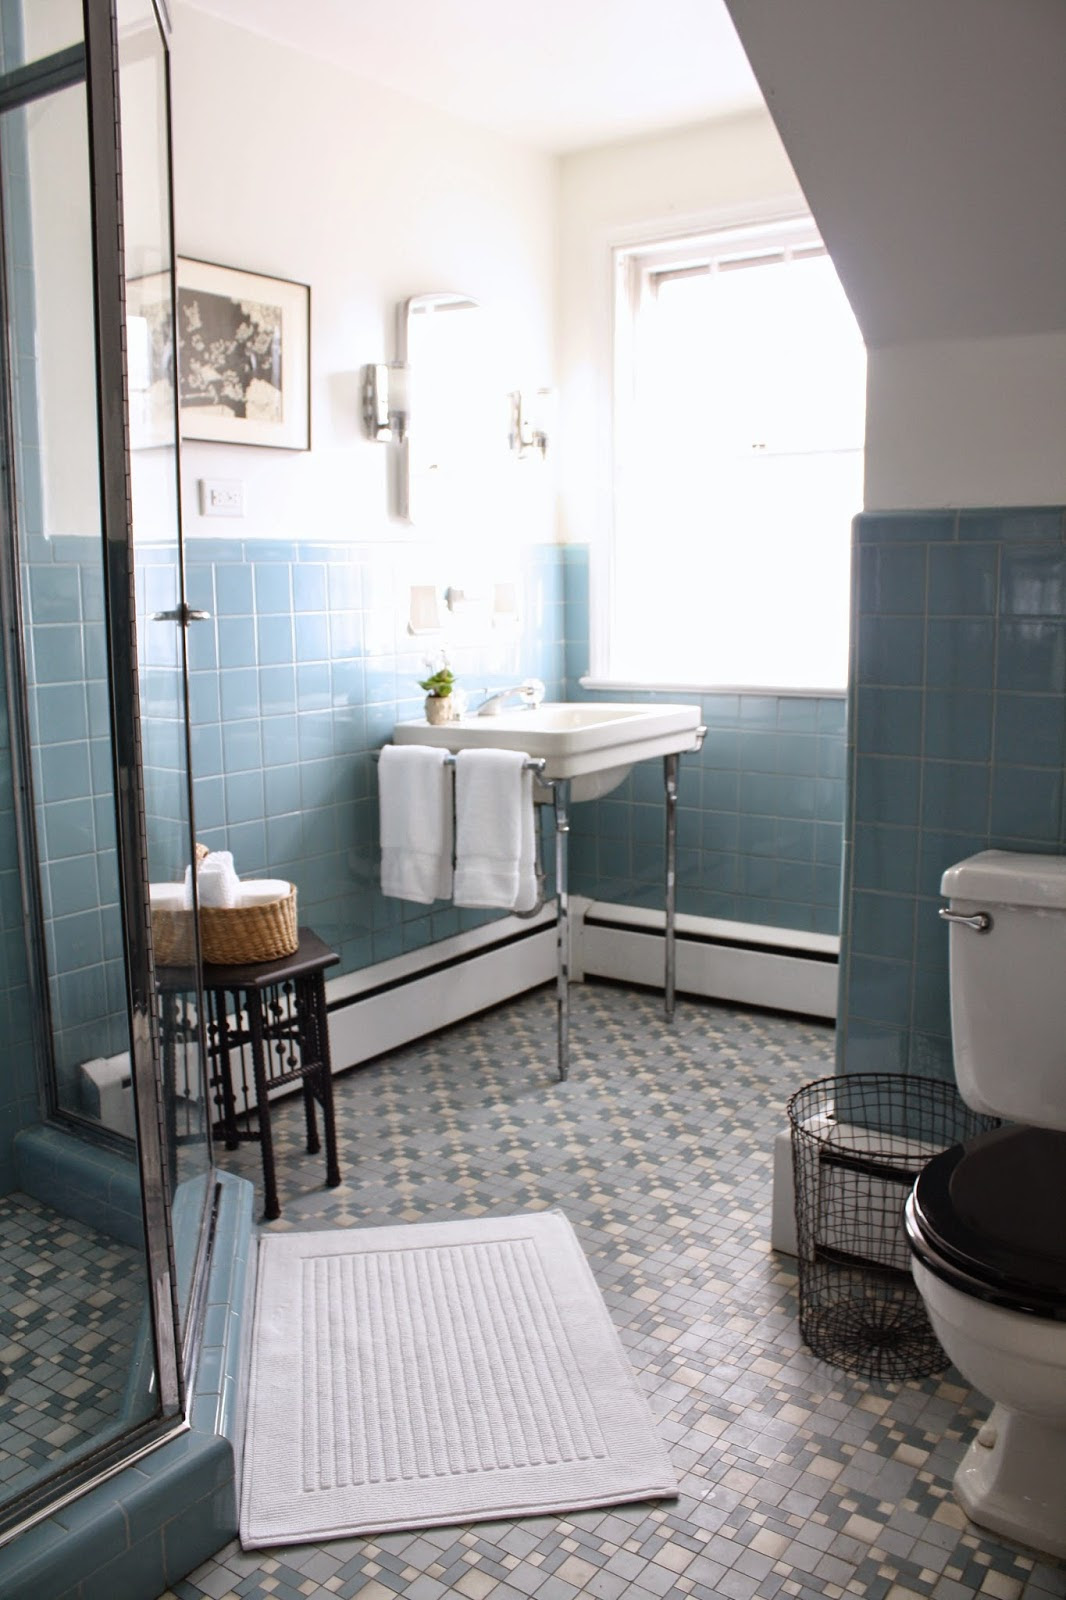 34 magnificent pictures and ideas of vintage bathroom ...